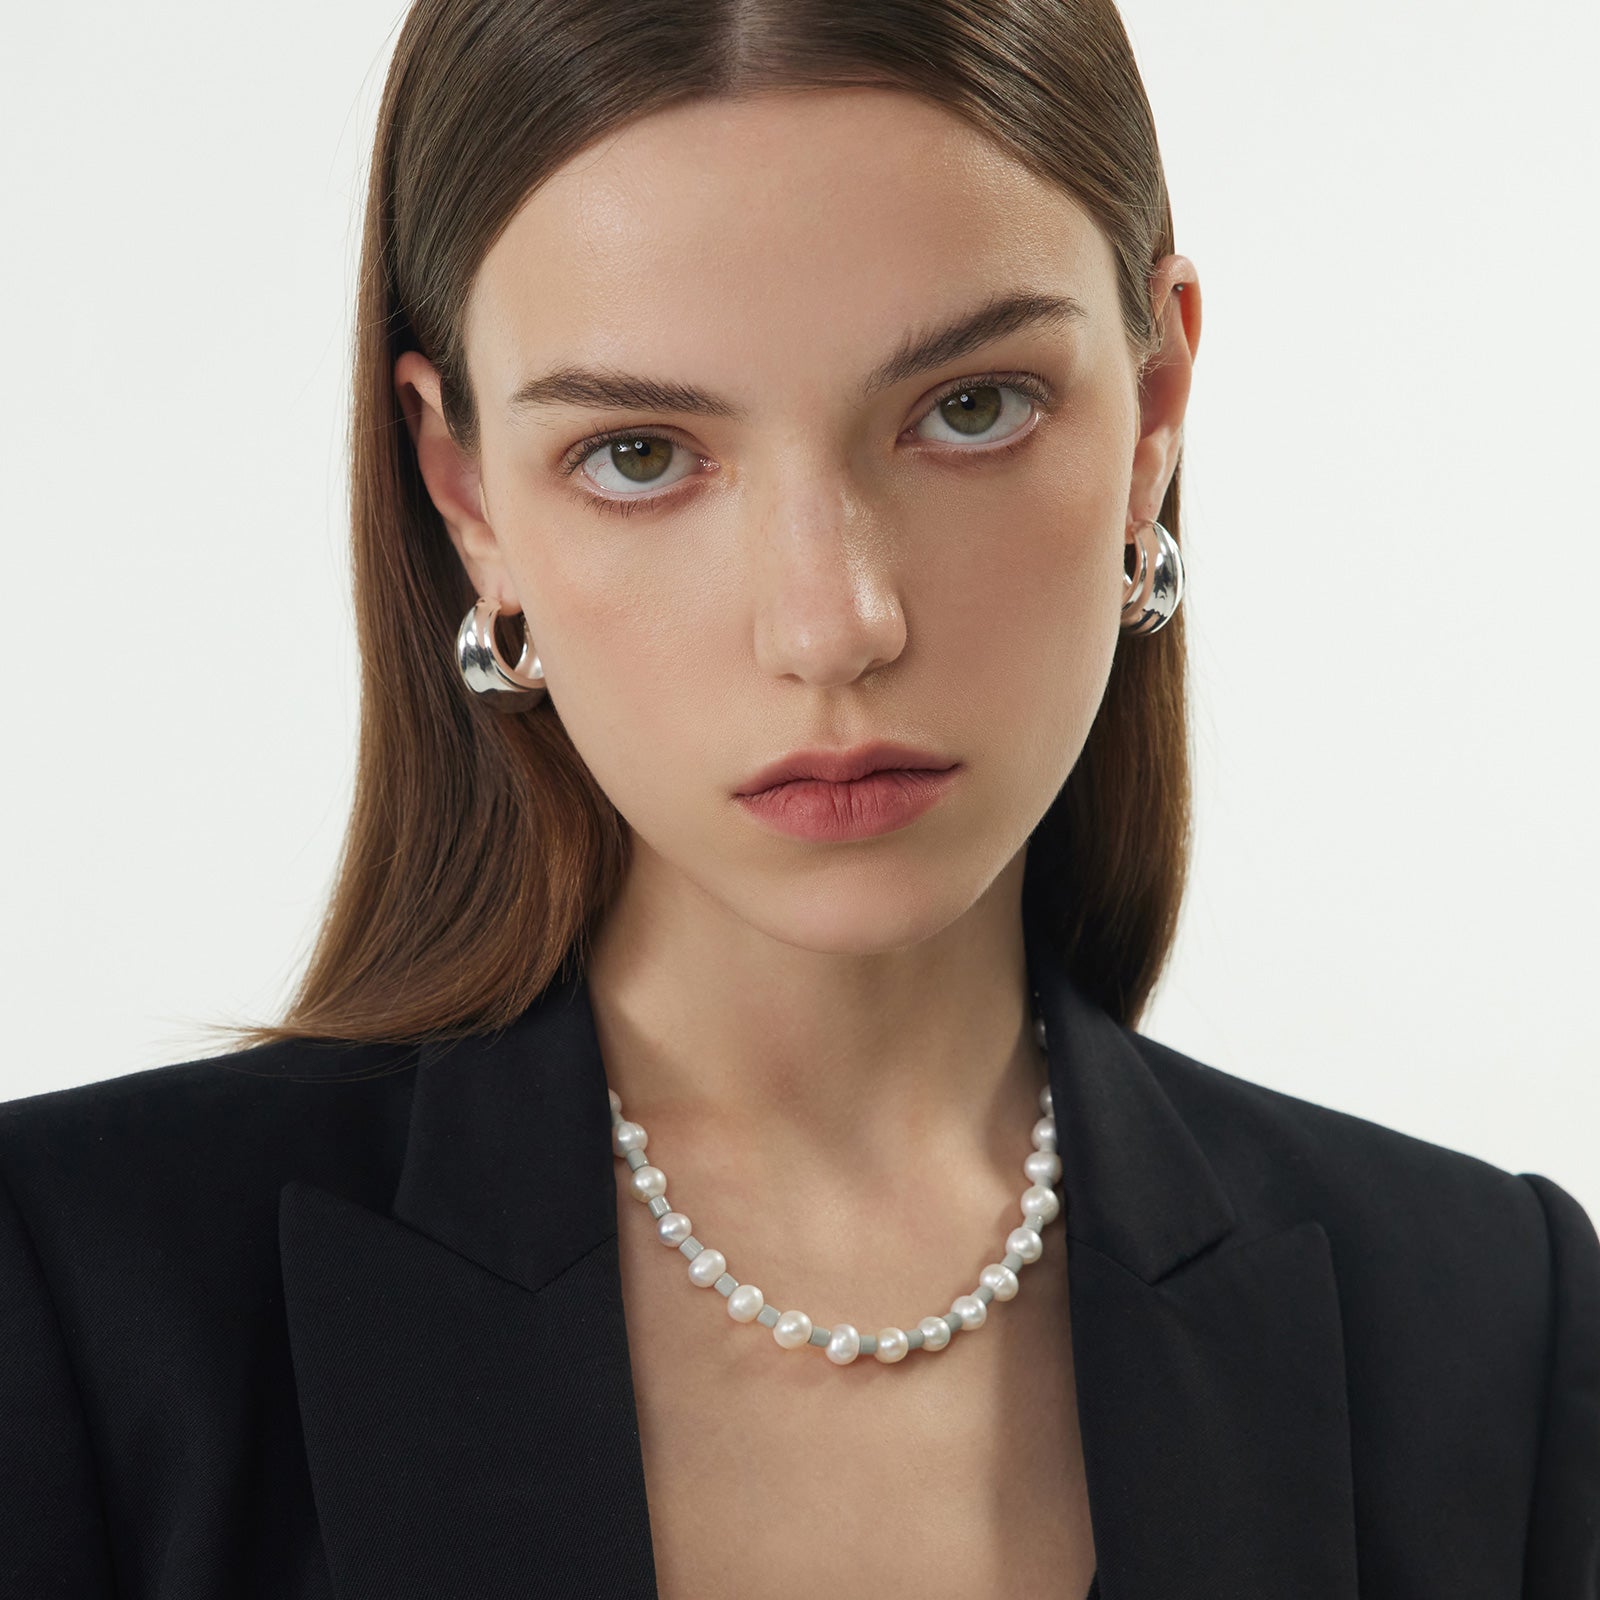 Ridge Hoop Earrings, adorned with a contemporary ridge charm, these earrings blend modernity with sophistication, creating a versatile and fashionable accessory.